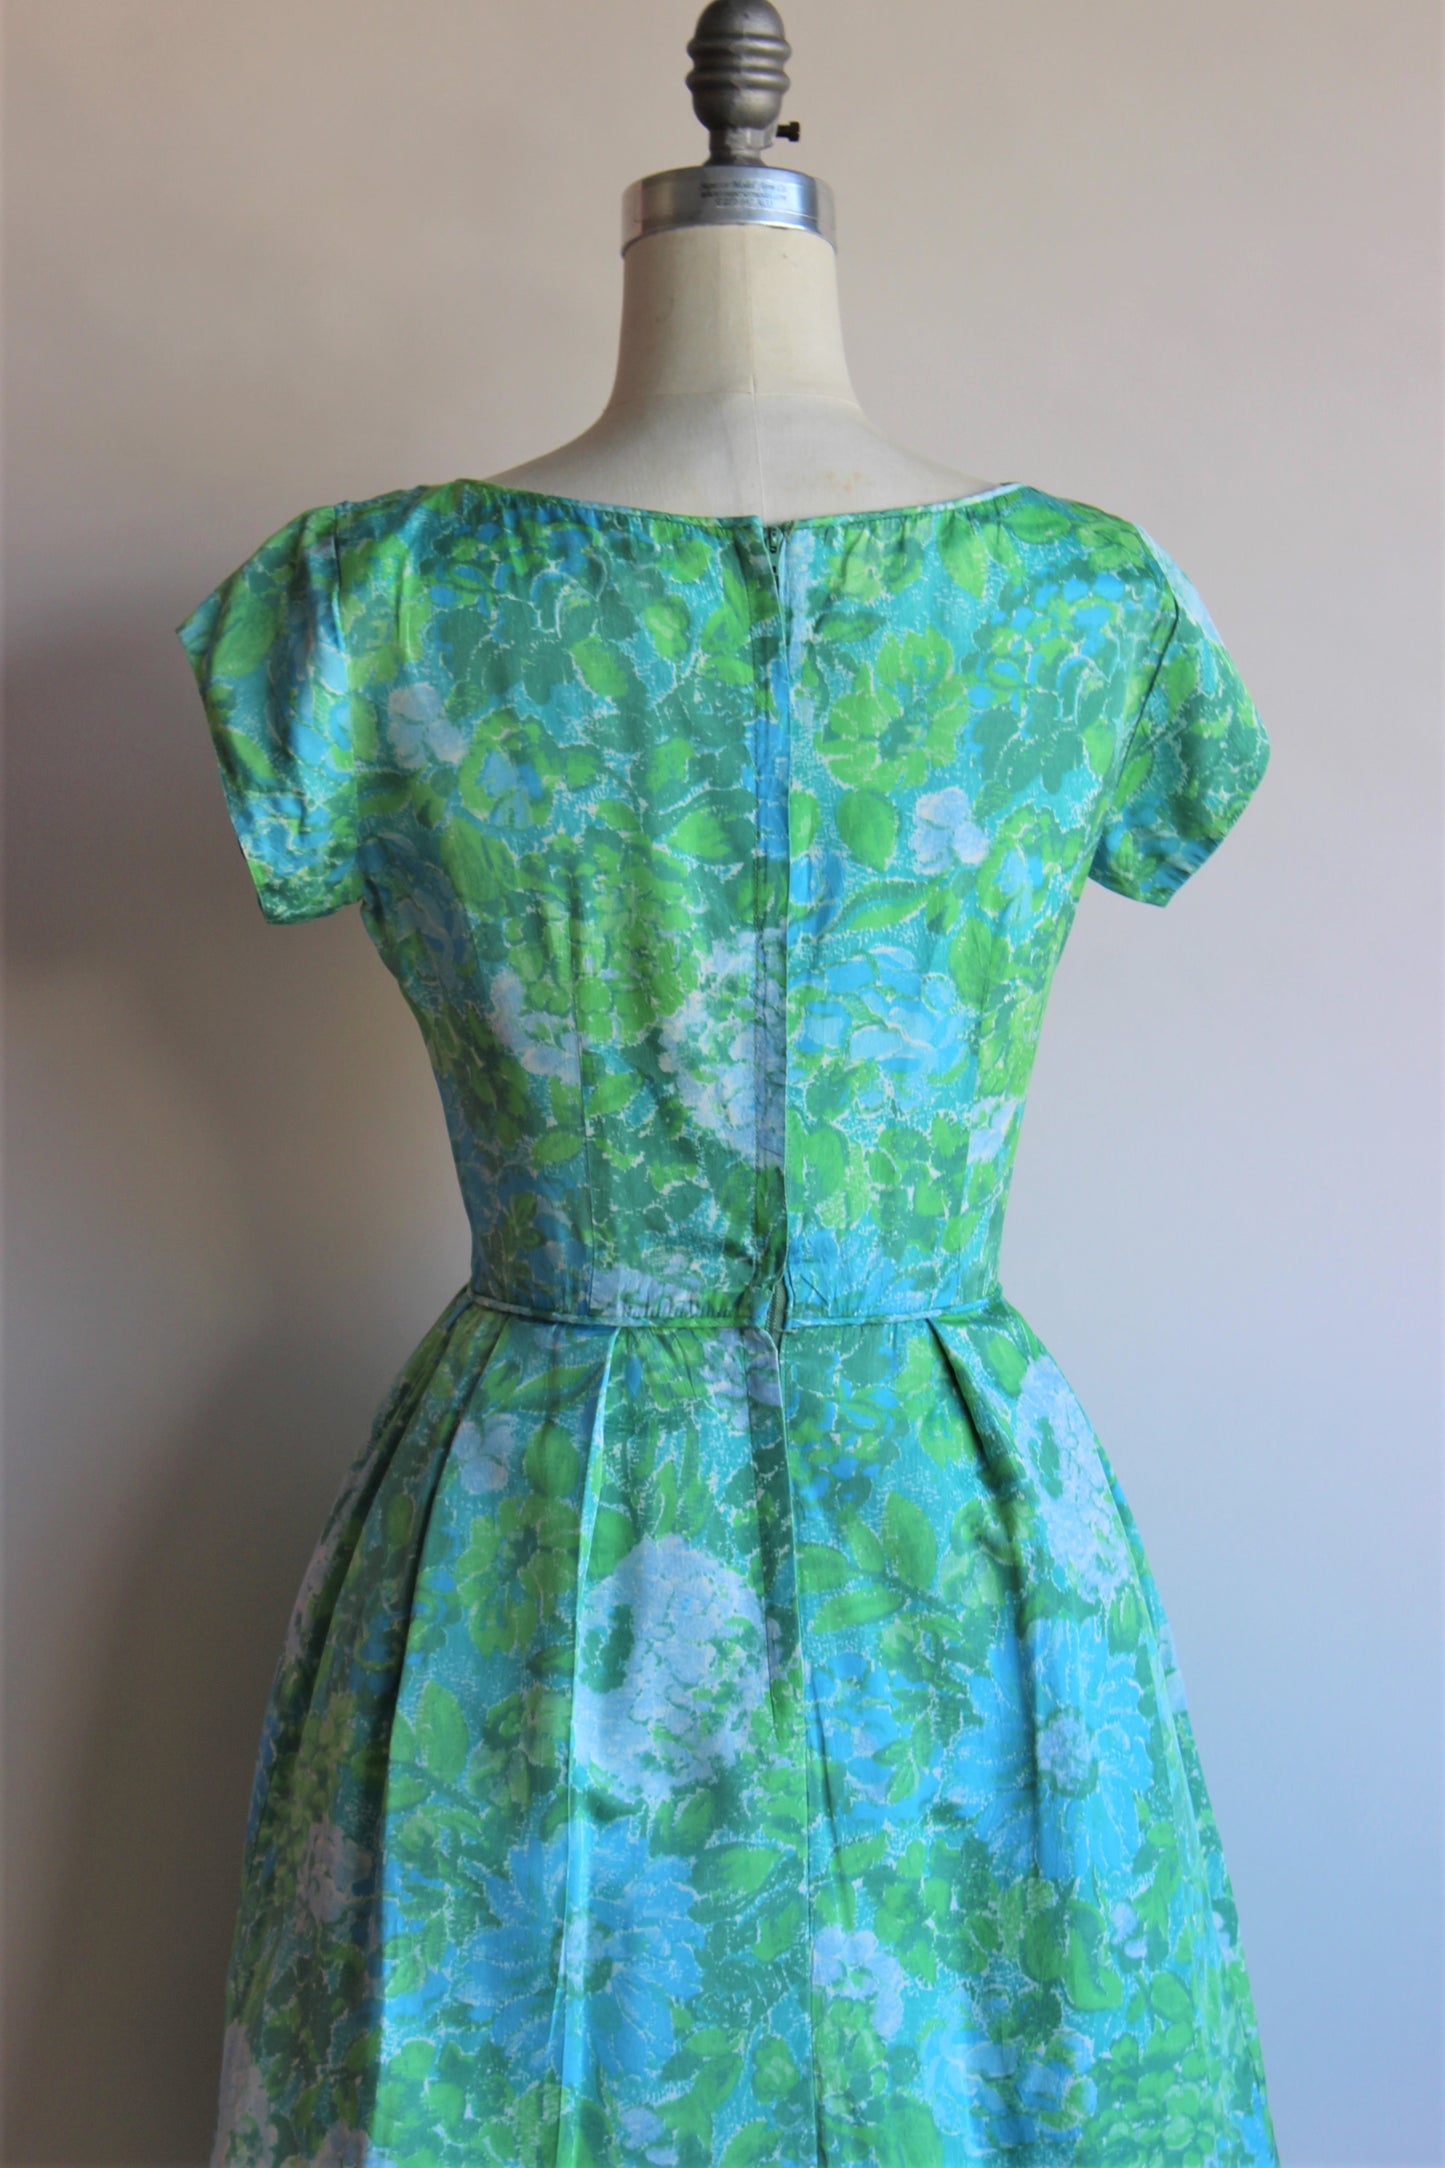 Vintage 1950s 1960s Blue Rose Fit And Flare Dress by Elinor Gay ...